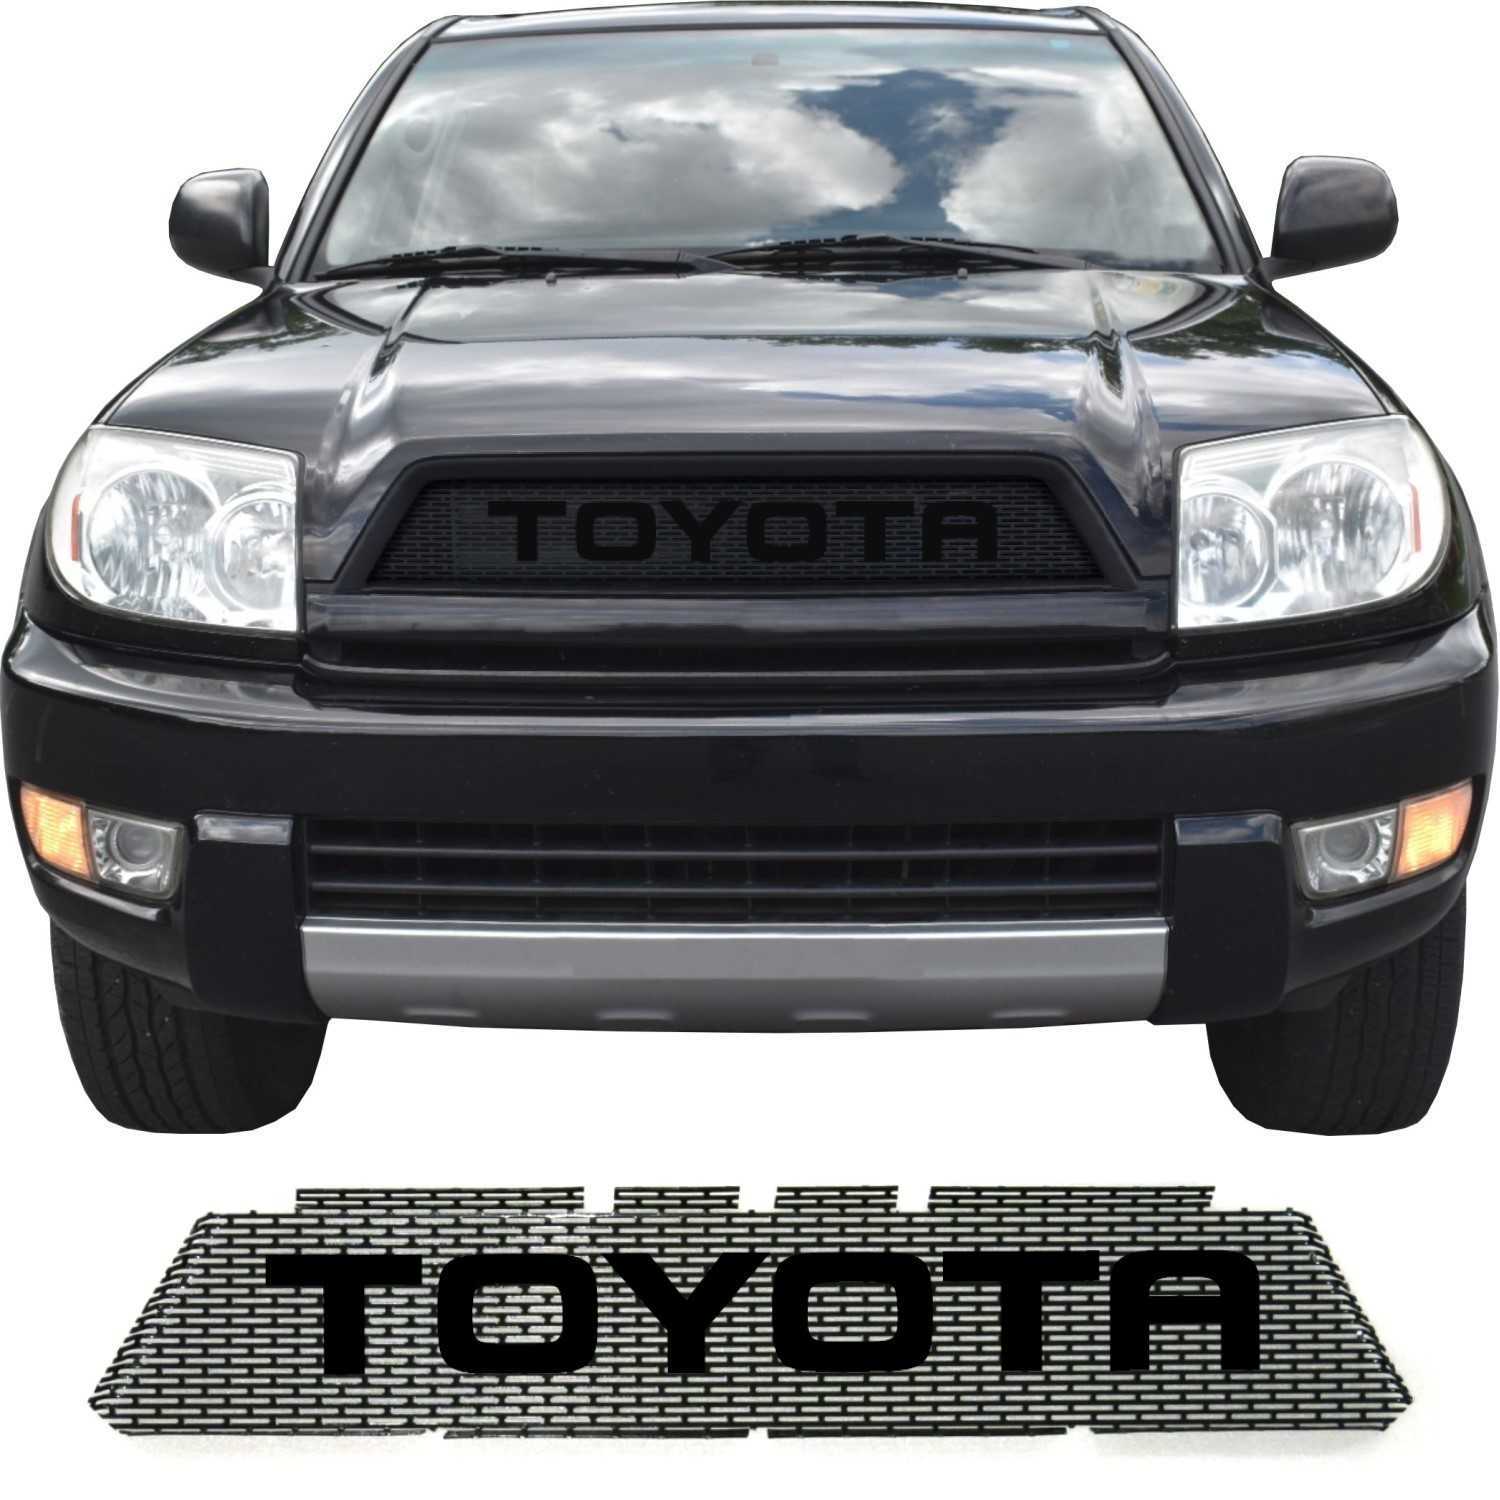 2003 - 2005 Toyota 4Runner Grill Mesh with Big Letters